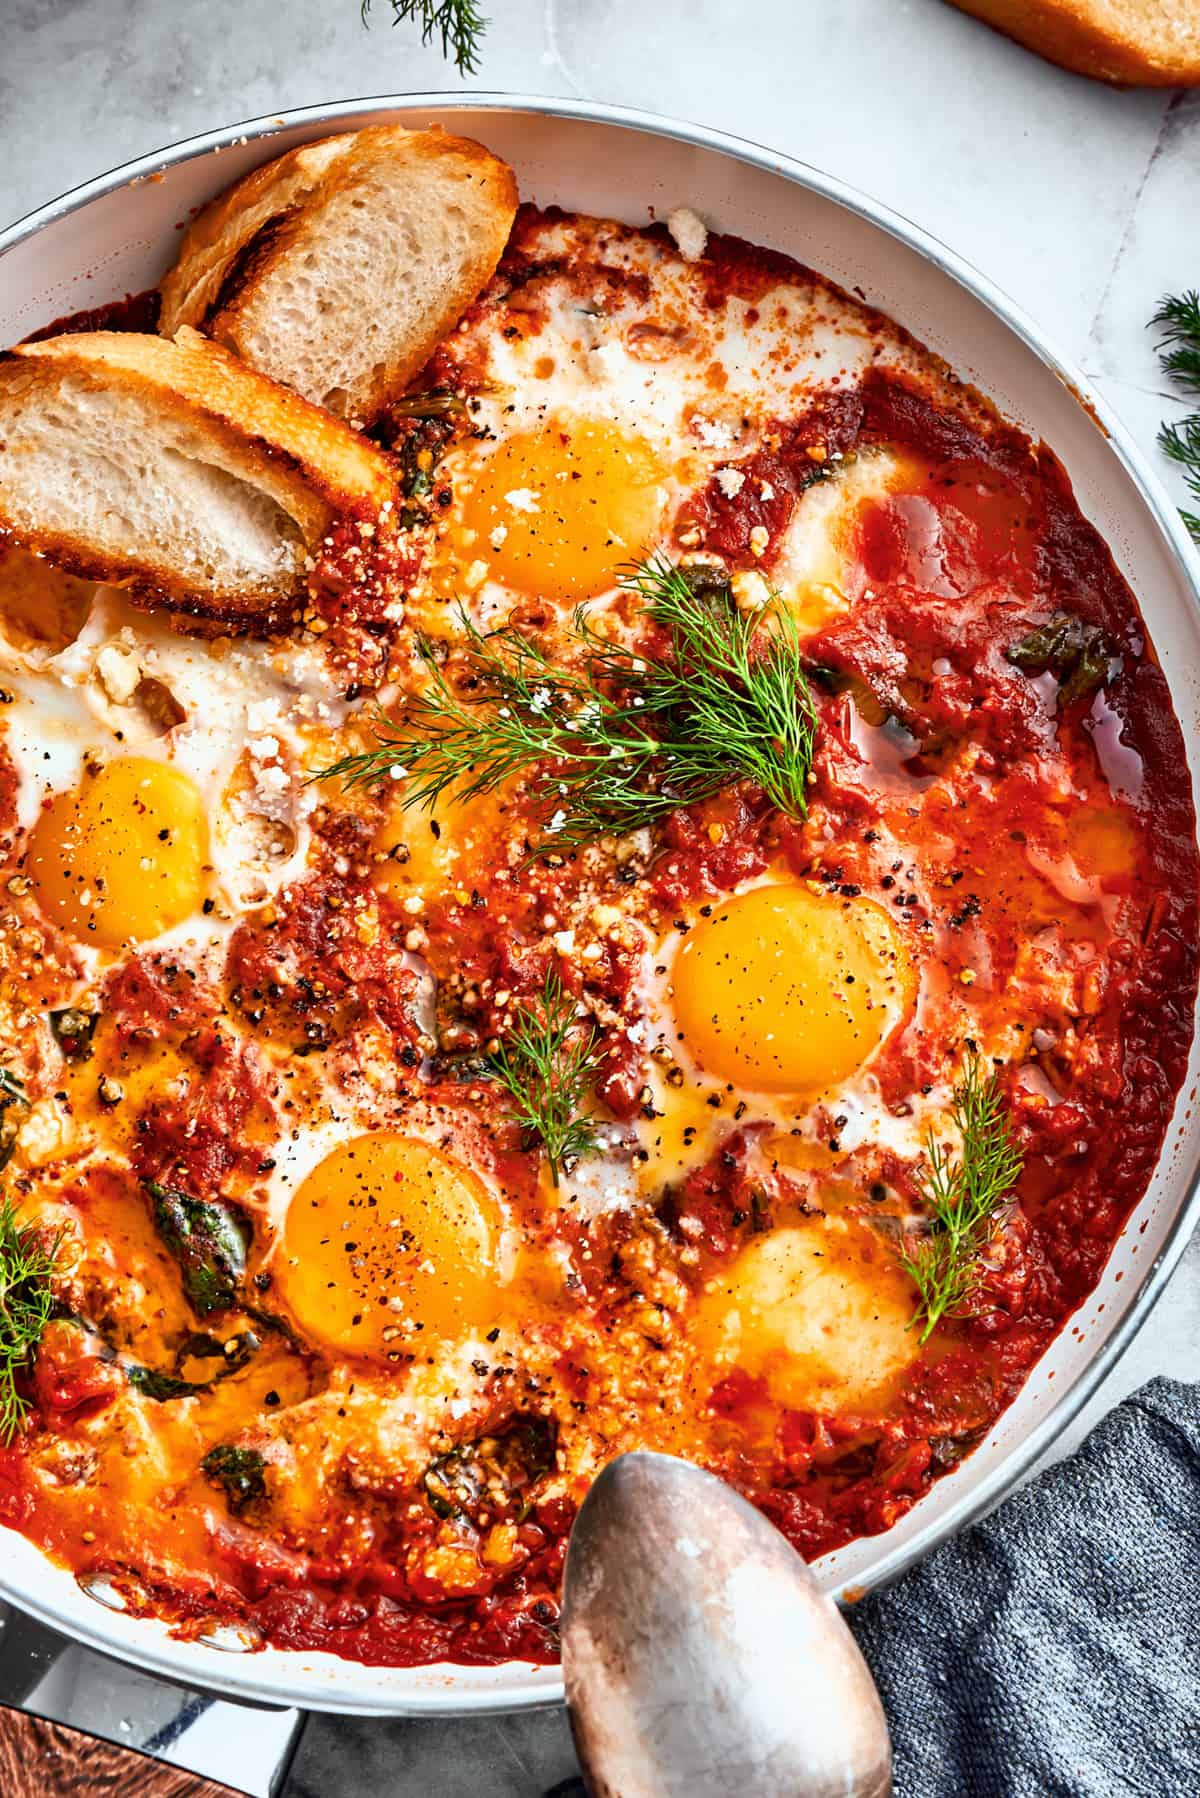 Overhead up close image of a skillet with cooked eggs in purgatory and garnished with parsley and toasted bread.